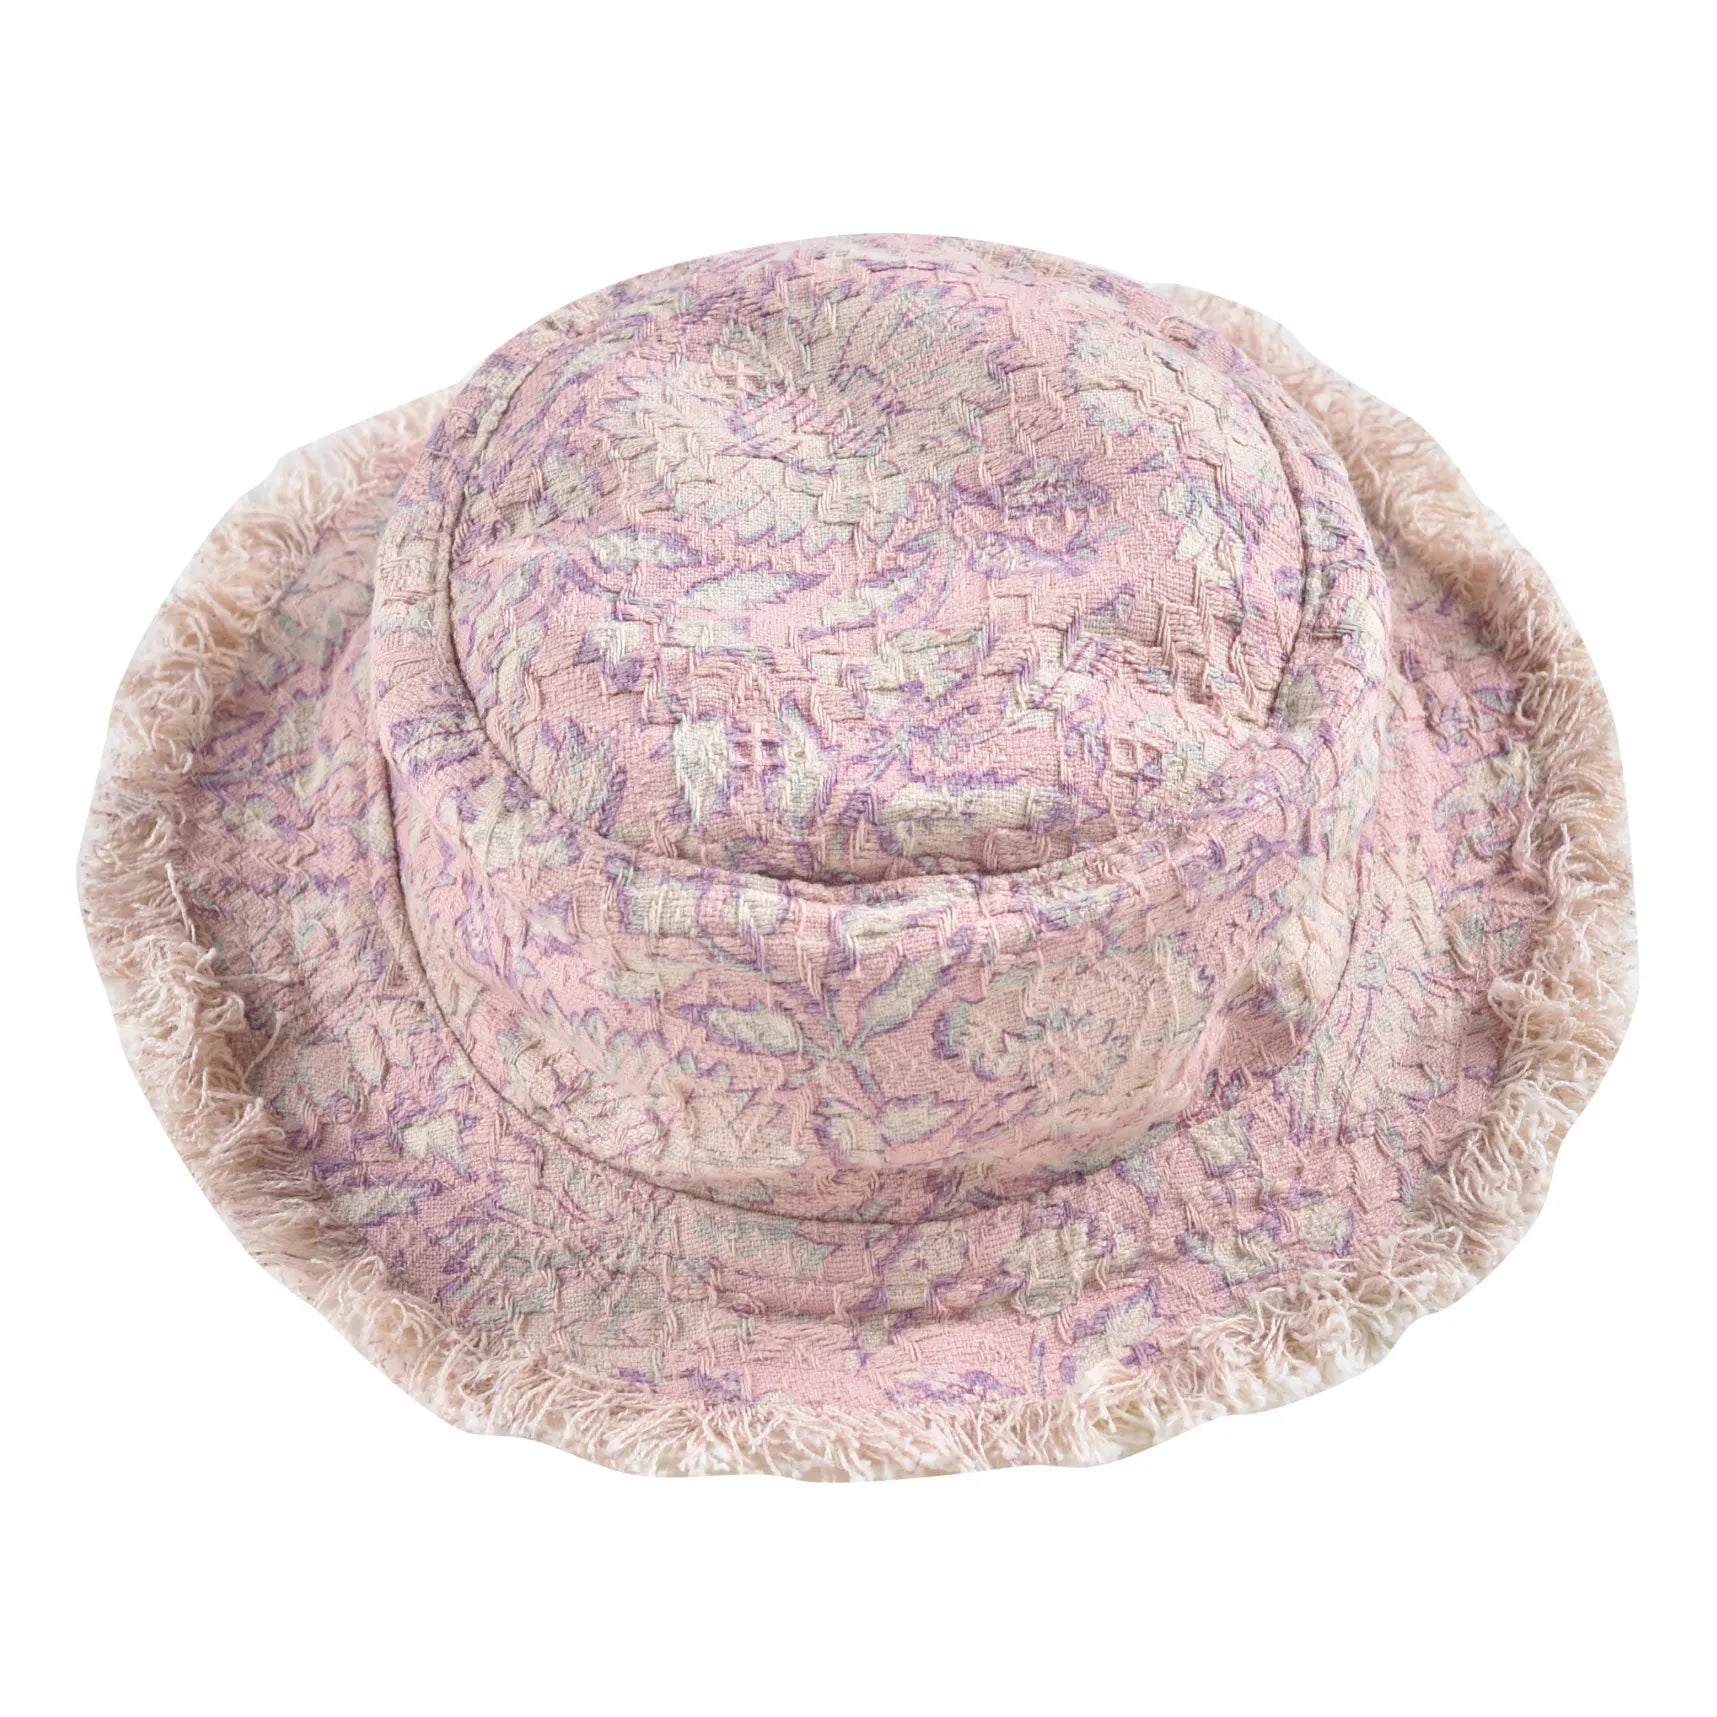 This women's bucket sun hat is feminine, stylish, and so easy to wear! This women's sun hat is reversible, giving you two hats in one go - a pink daisy garden print and off-white colour. This women summer hat is designed by Louise Misha. Mini Me twinning hat is available for Mommy and daughter matching available.